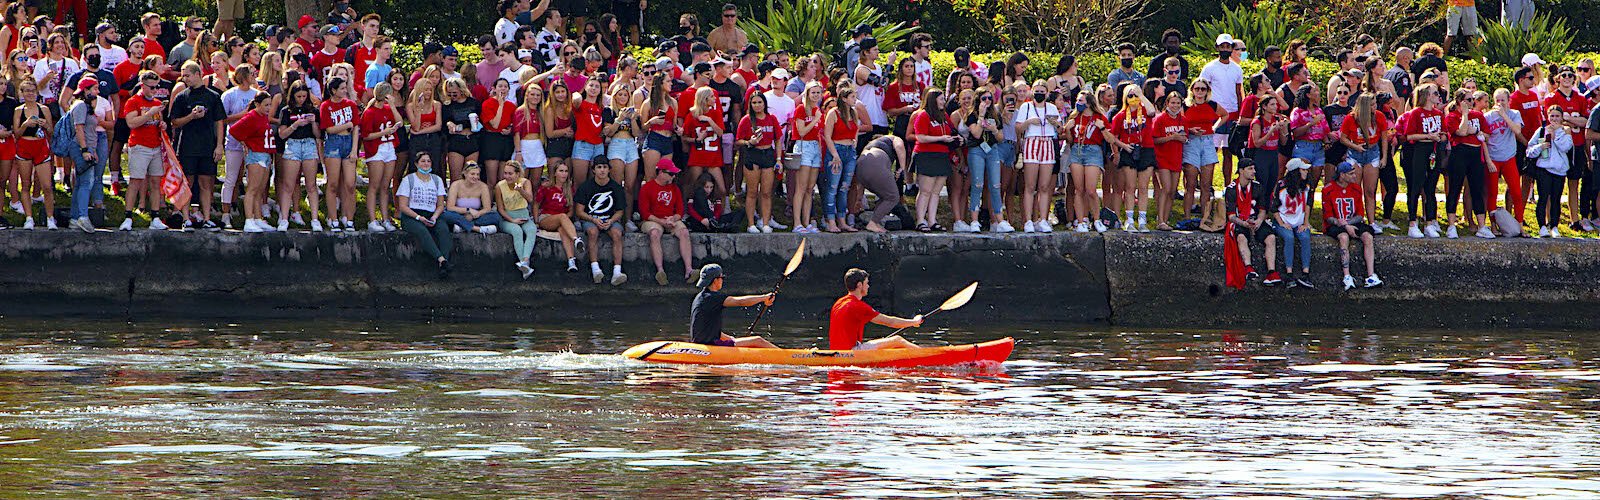 Kayakers, paddle boarders, and every kind of boat available joined in the boat parade honoring the Tampa Bay Bucs.